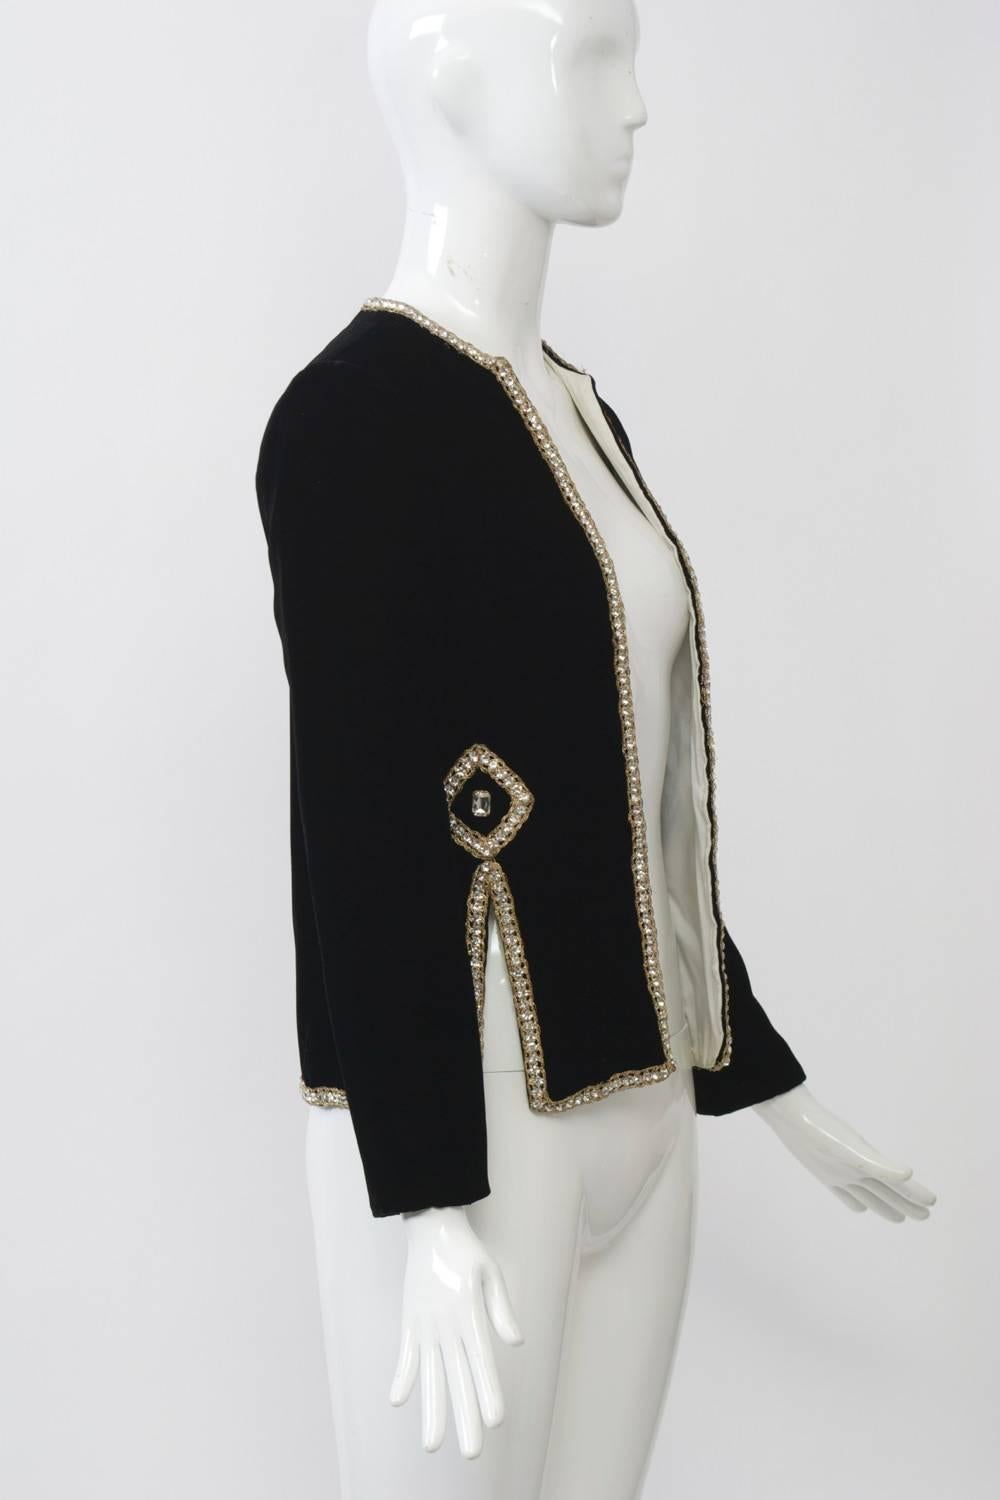 1960s Malcolm Starr black velvet features gold braid and rhinestone trim edging around the open front, round collar, and hem, as well as the deep slits towards each side, where they are topped by a diamond-patterned embellishment centering a large